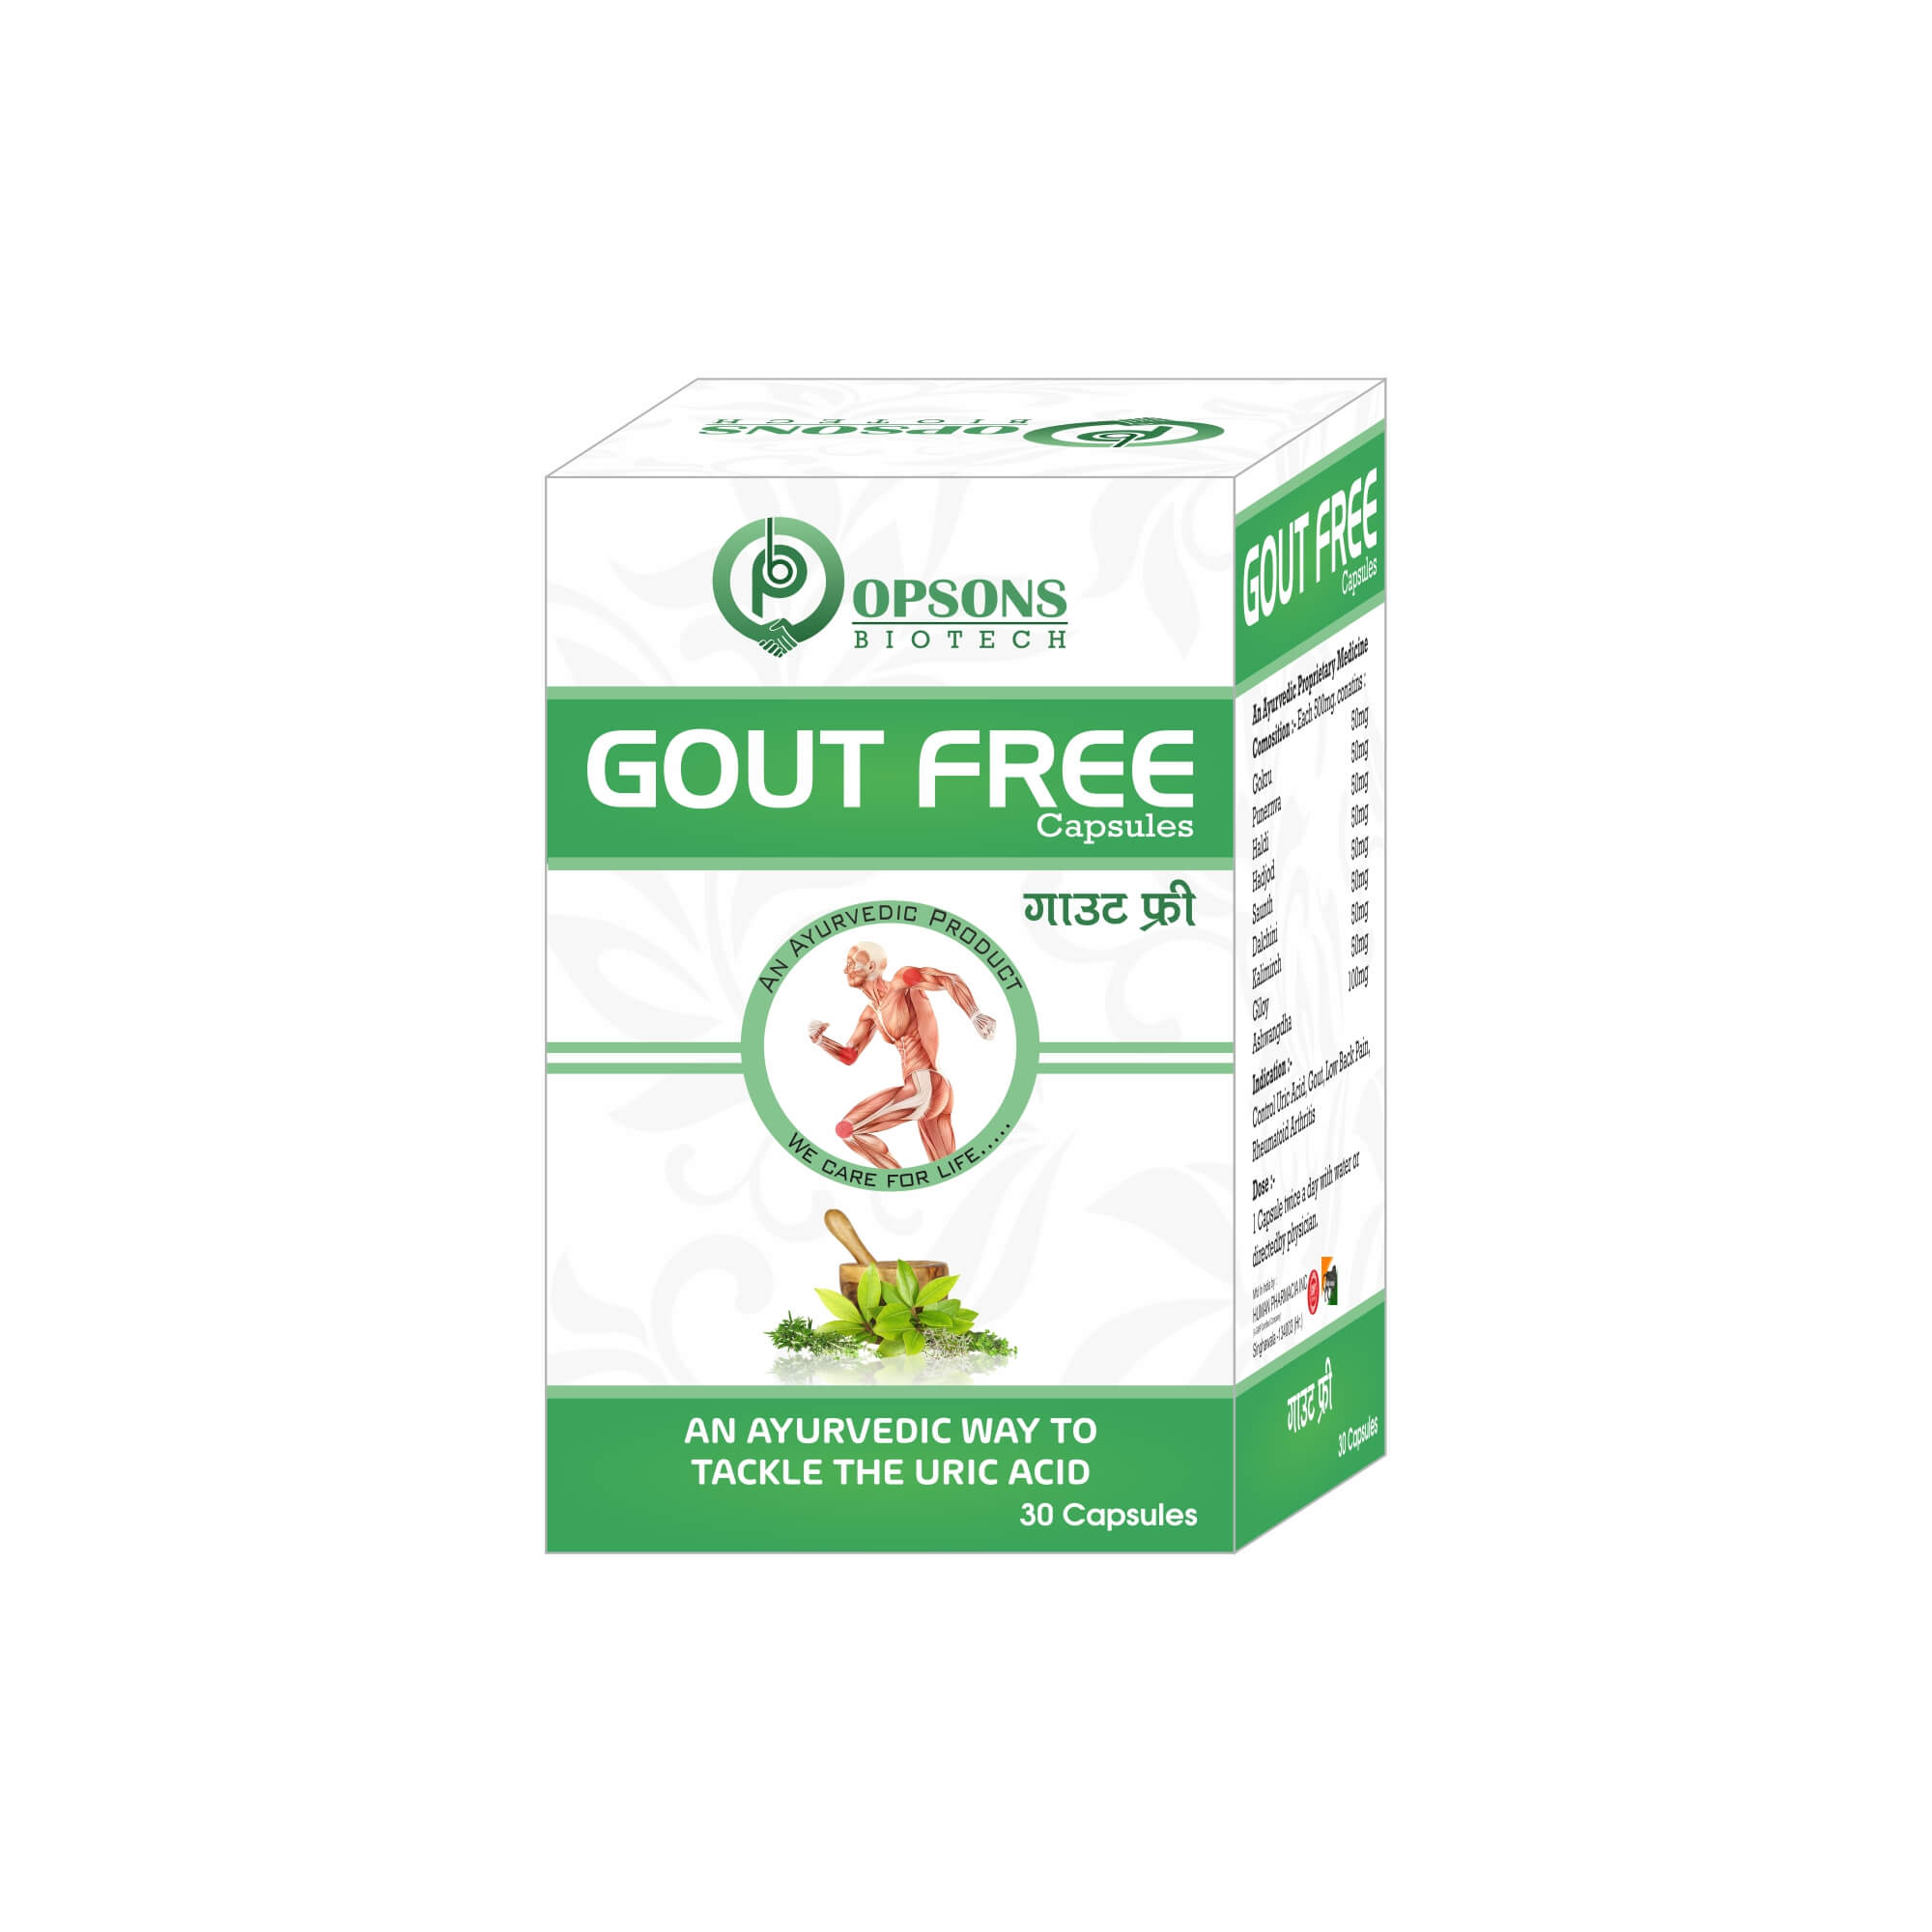 Product Name: Gout free capsules, Compositions of Gout free capsules are An Ayurvedic Way To Tackle The Uric Acid - Opsons Biotech